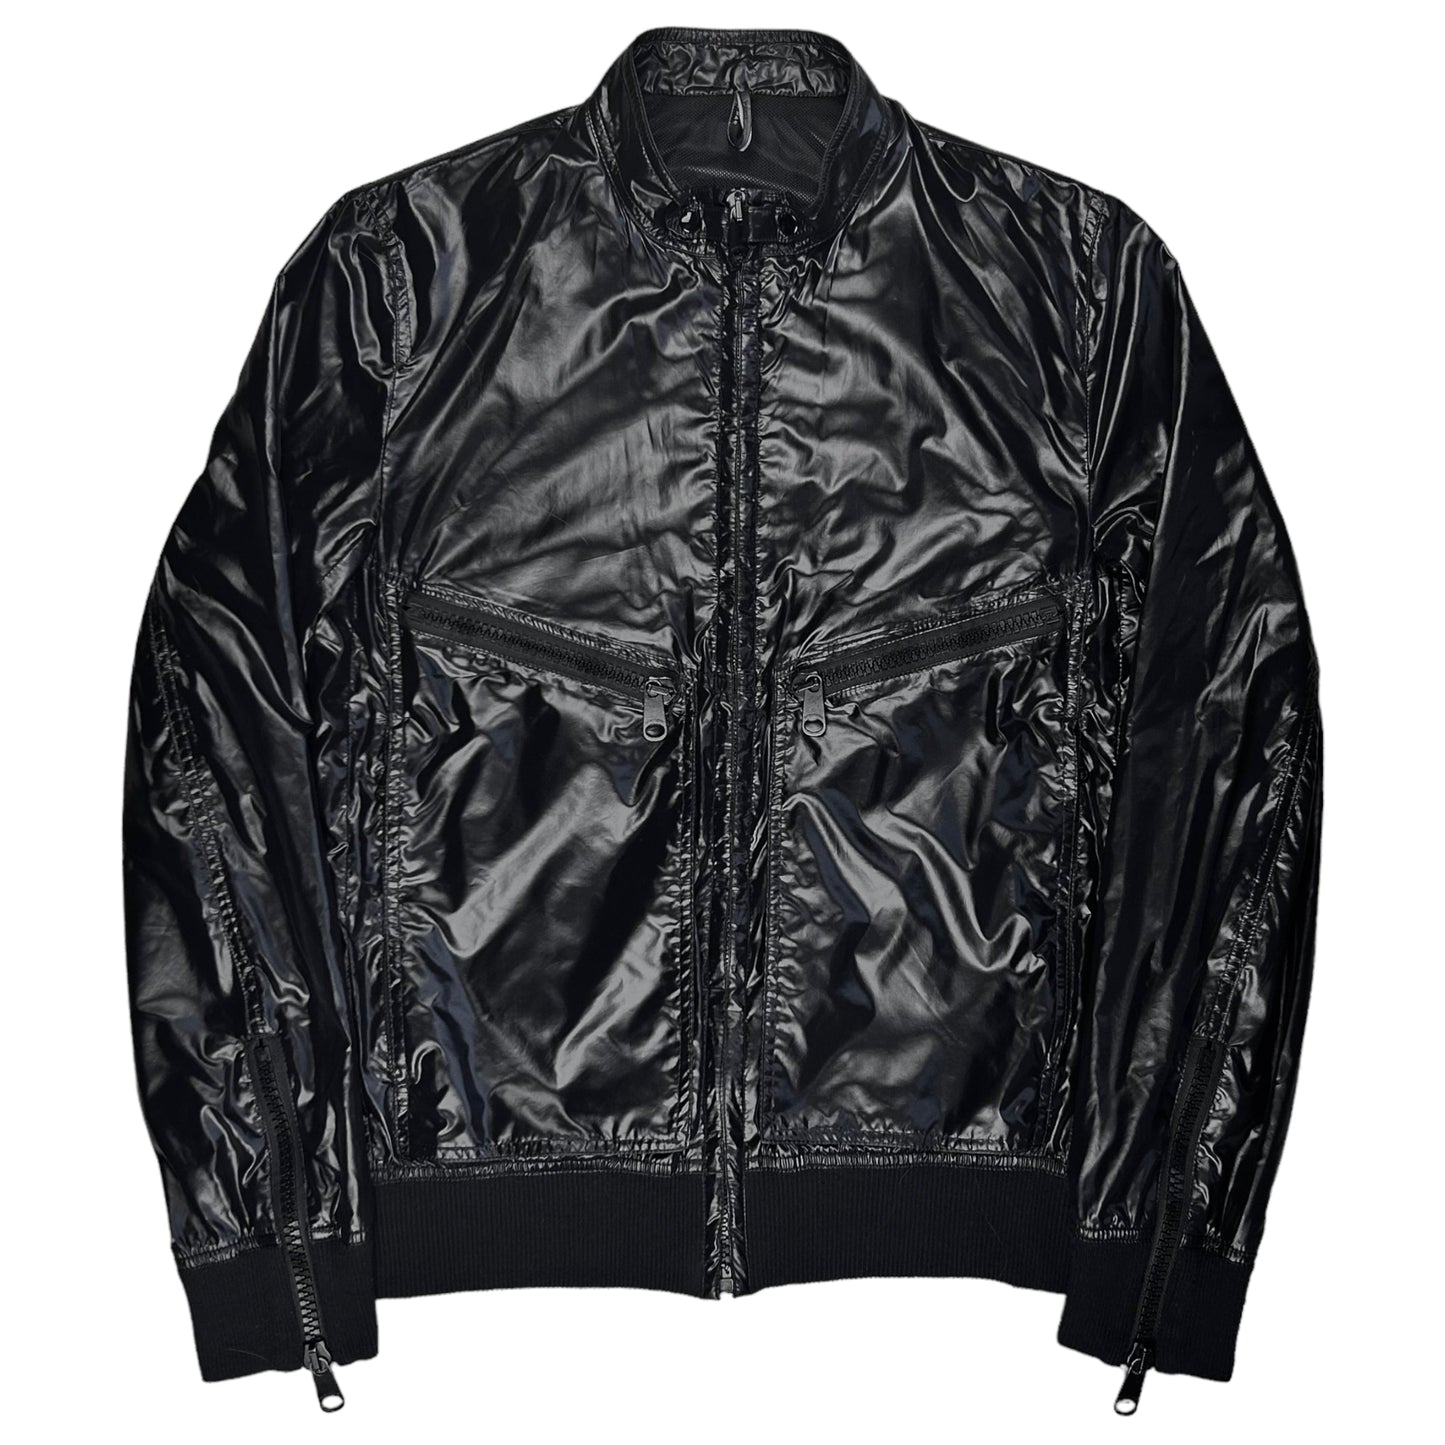 Dior Homme Glowing Cargo Bomber Jacket - SS09